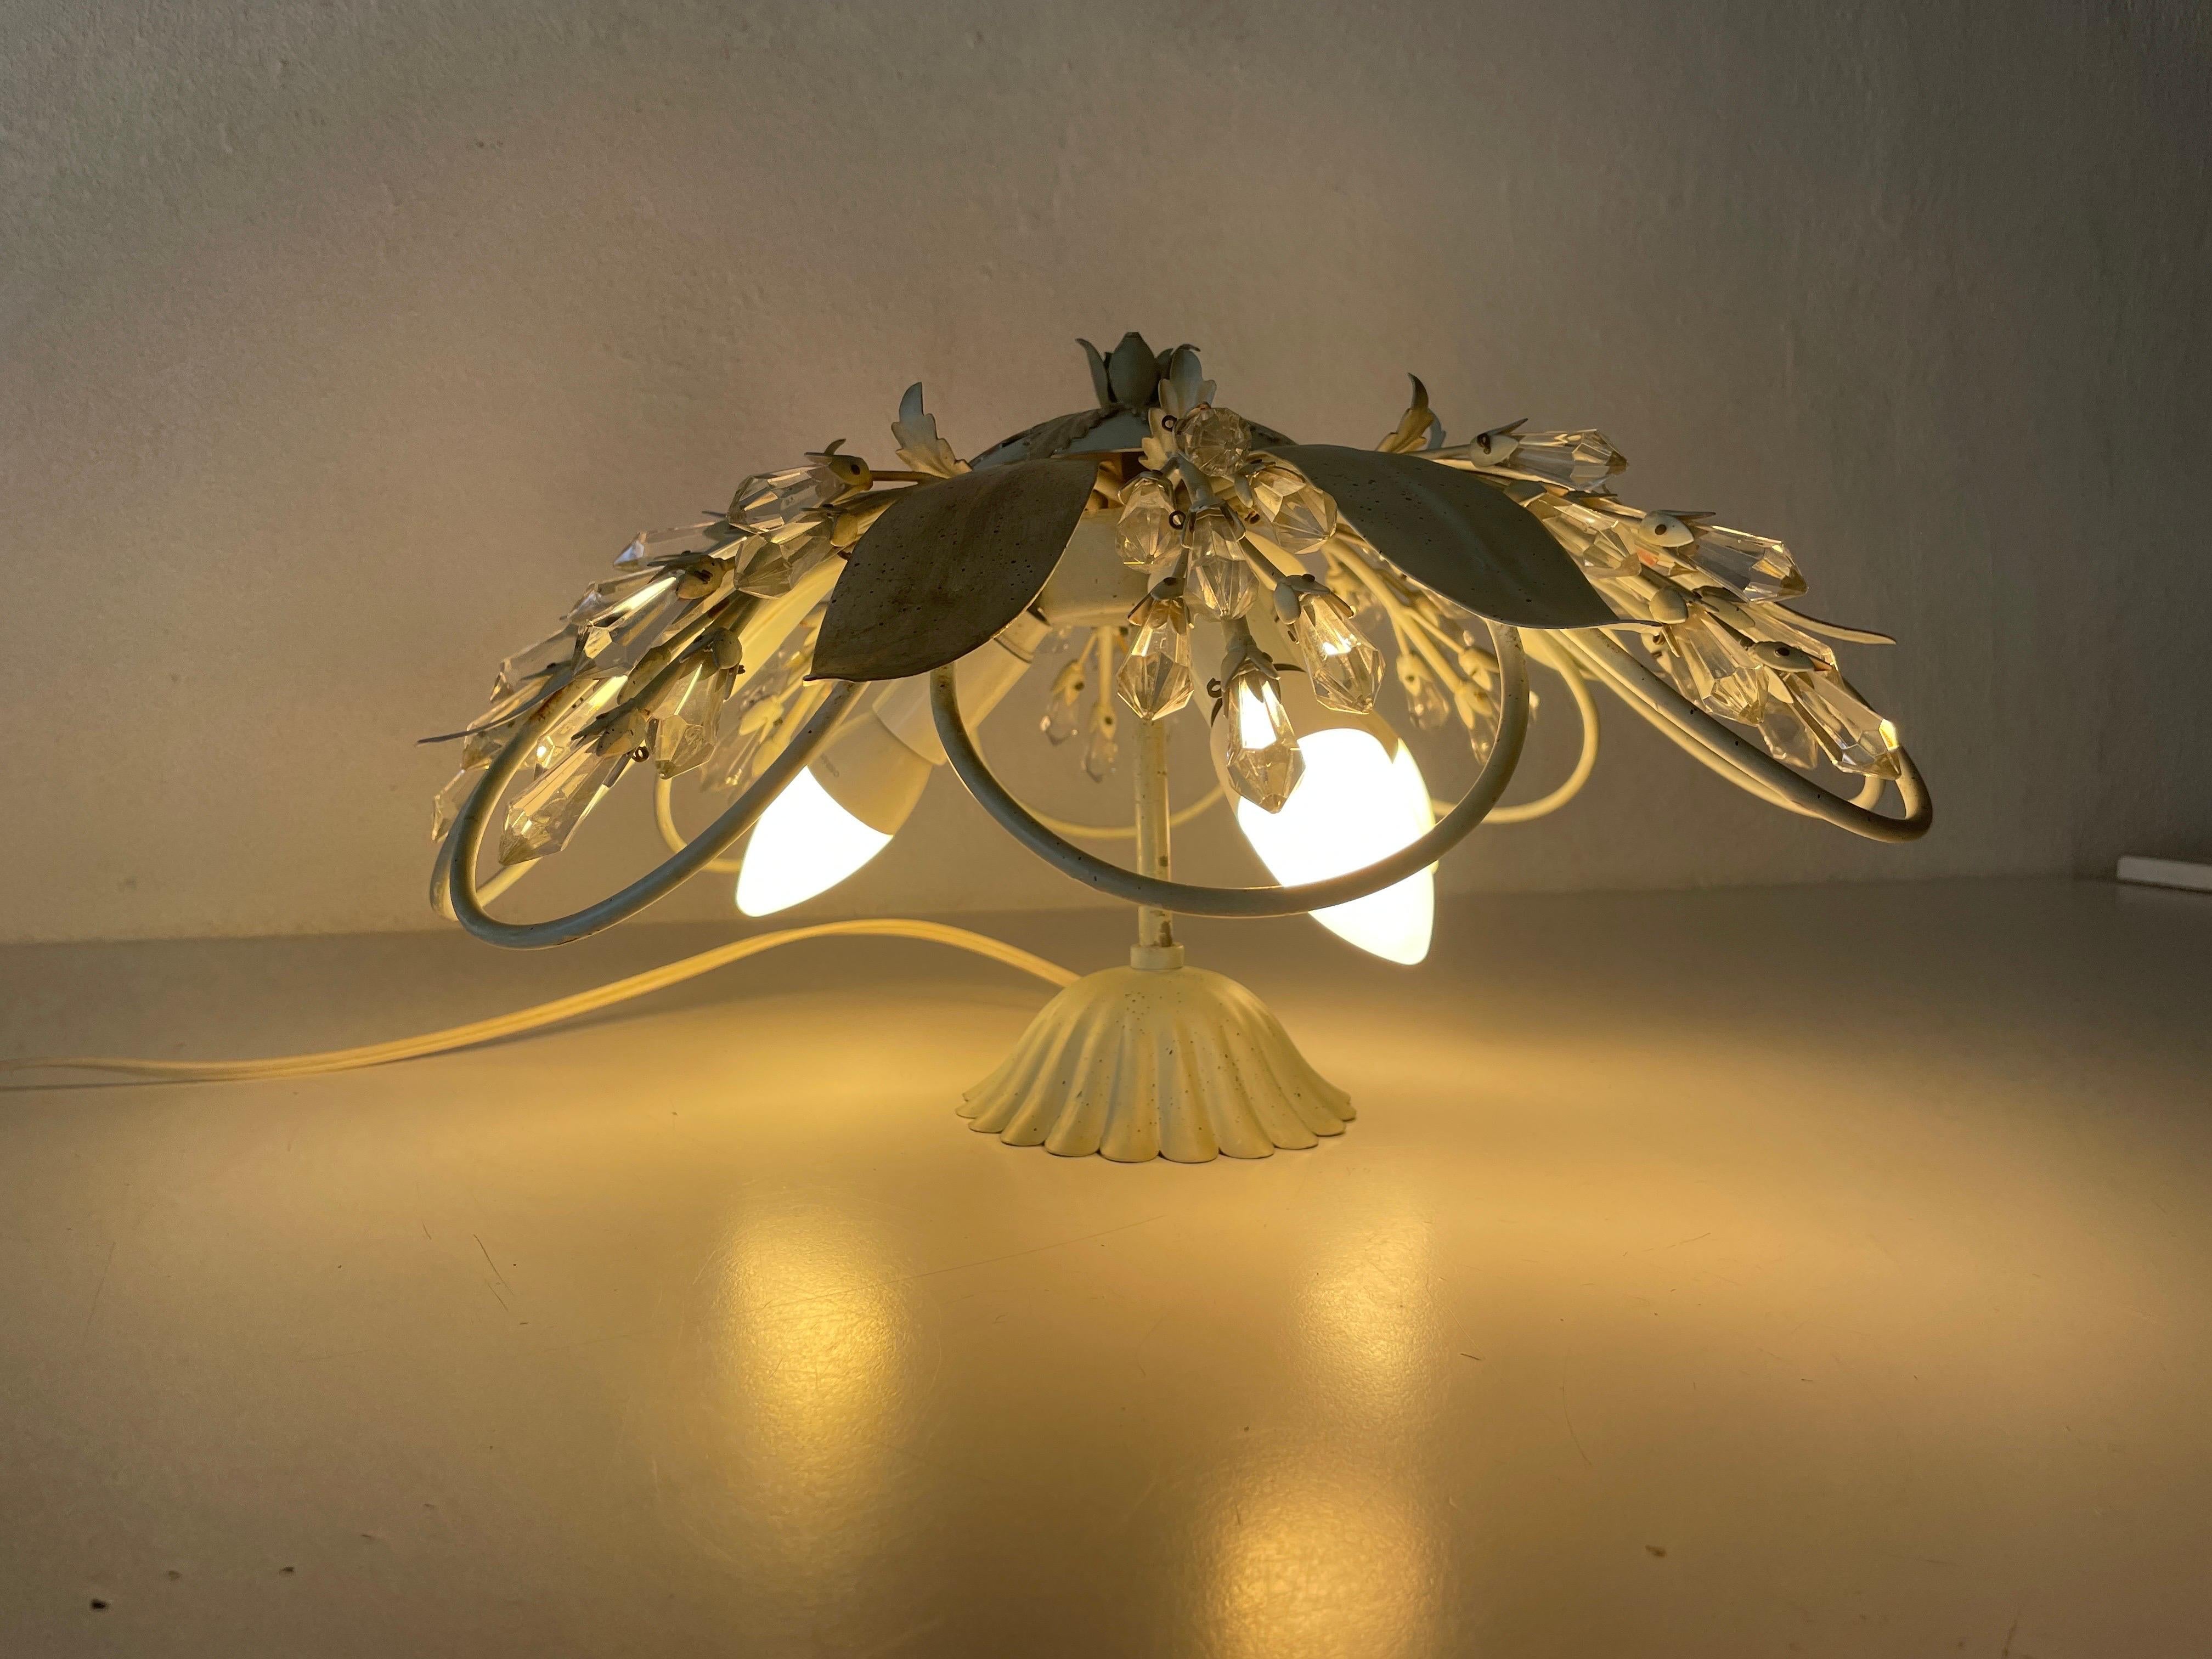 Flower Design Ceiling Lamp with Glass Ornaments, 1950s, Germany For Sale 10